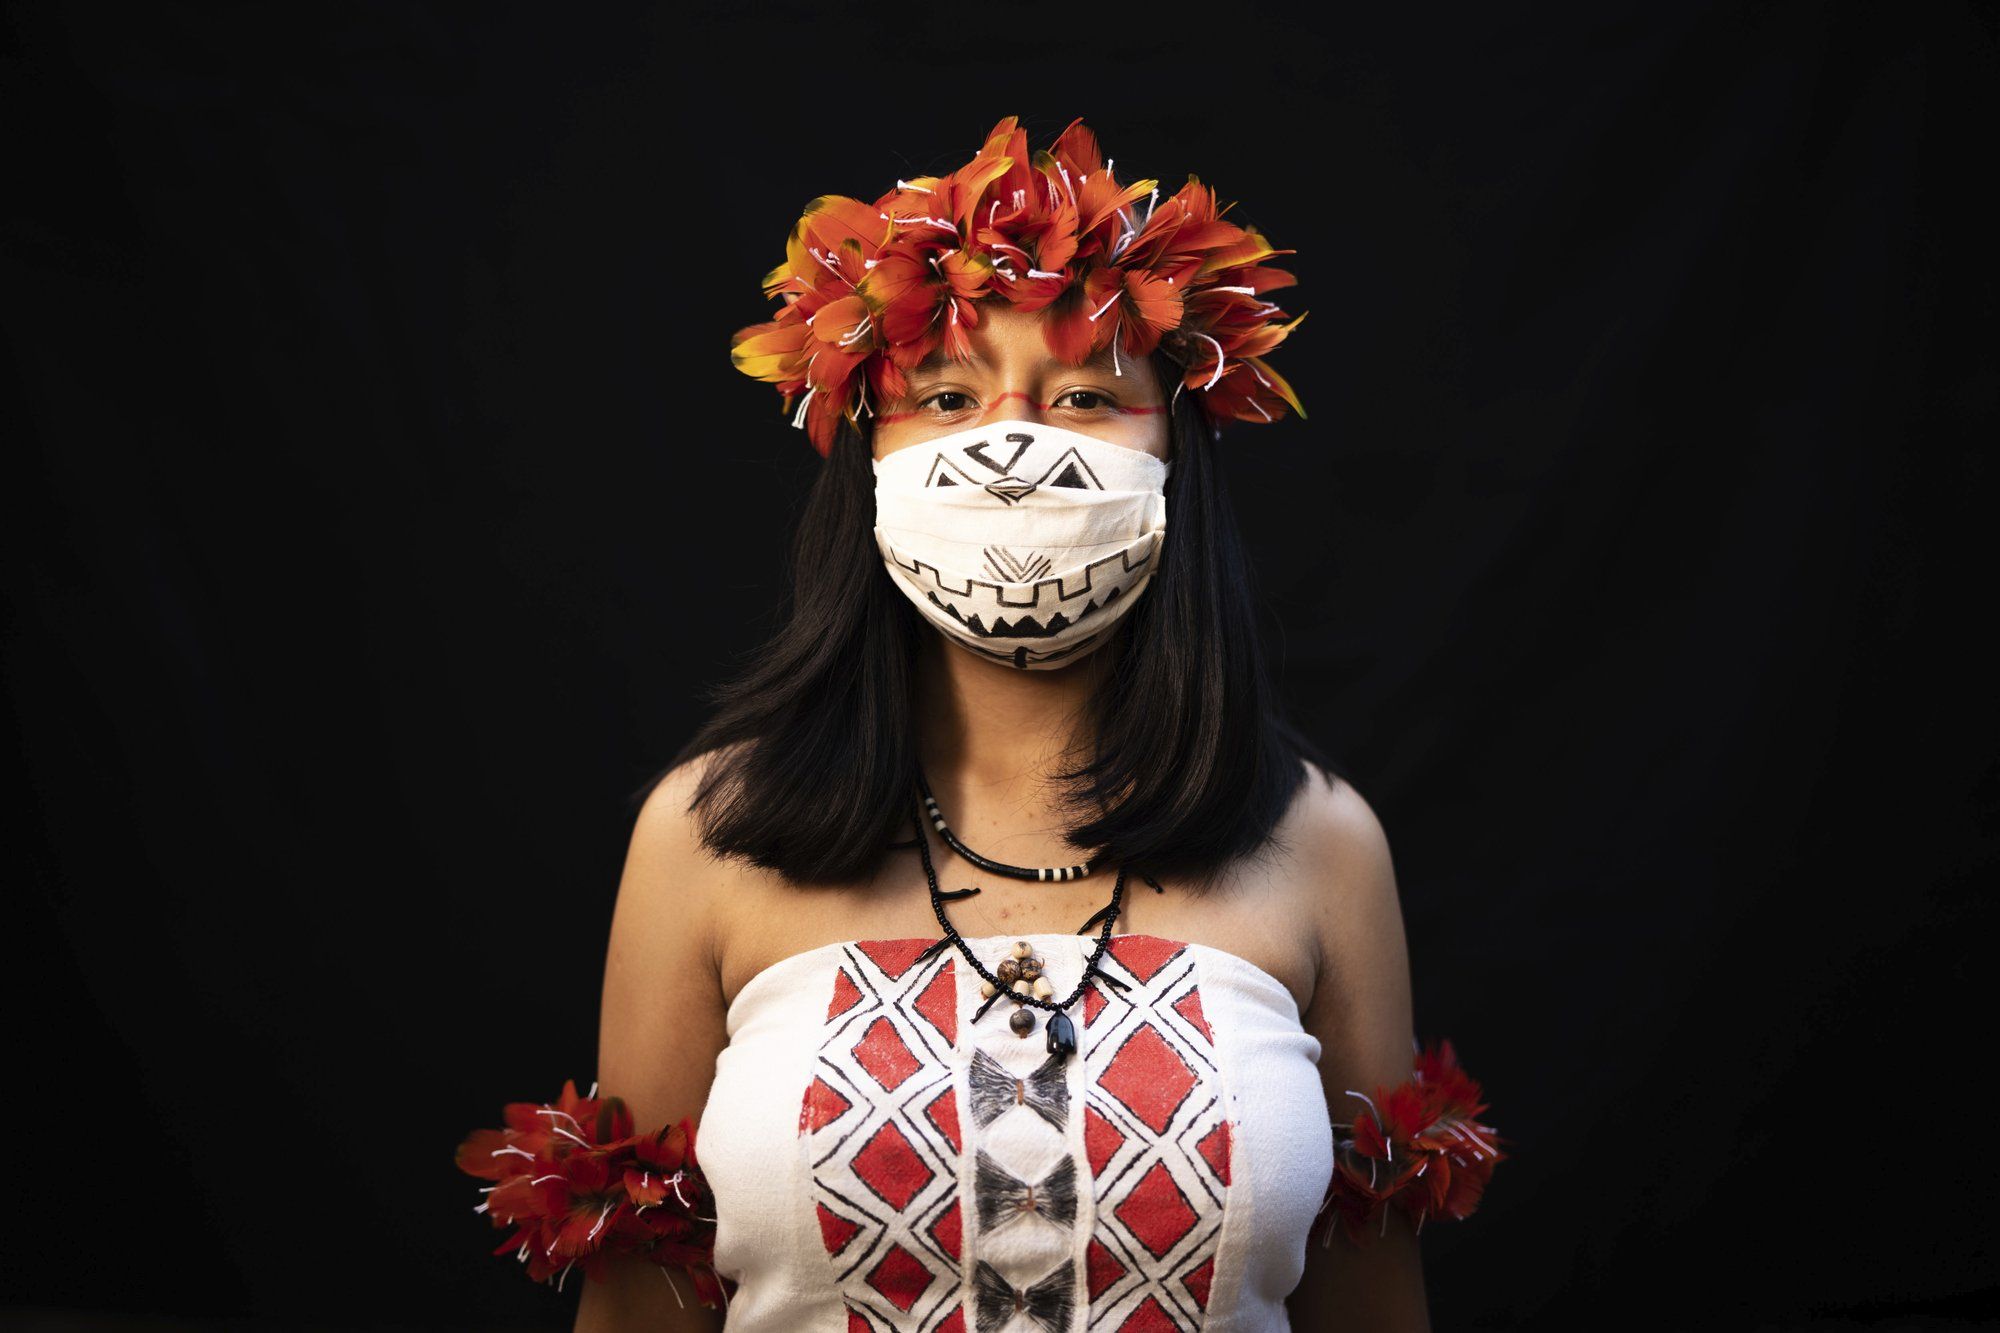 Yusuro Dupohtiro, 15, of the Dessana and Sateré Mawé indigenous ethnic groups, poses for a portrait wearing the traditional dress of her tribe and a face mask amid the spread of the new coronavirus in Manaus, Brazil, Wednesday, May 27, 2020. Image by Felipe Dana / AP Photo. Brazil, 2020.